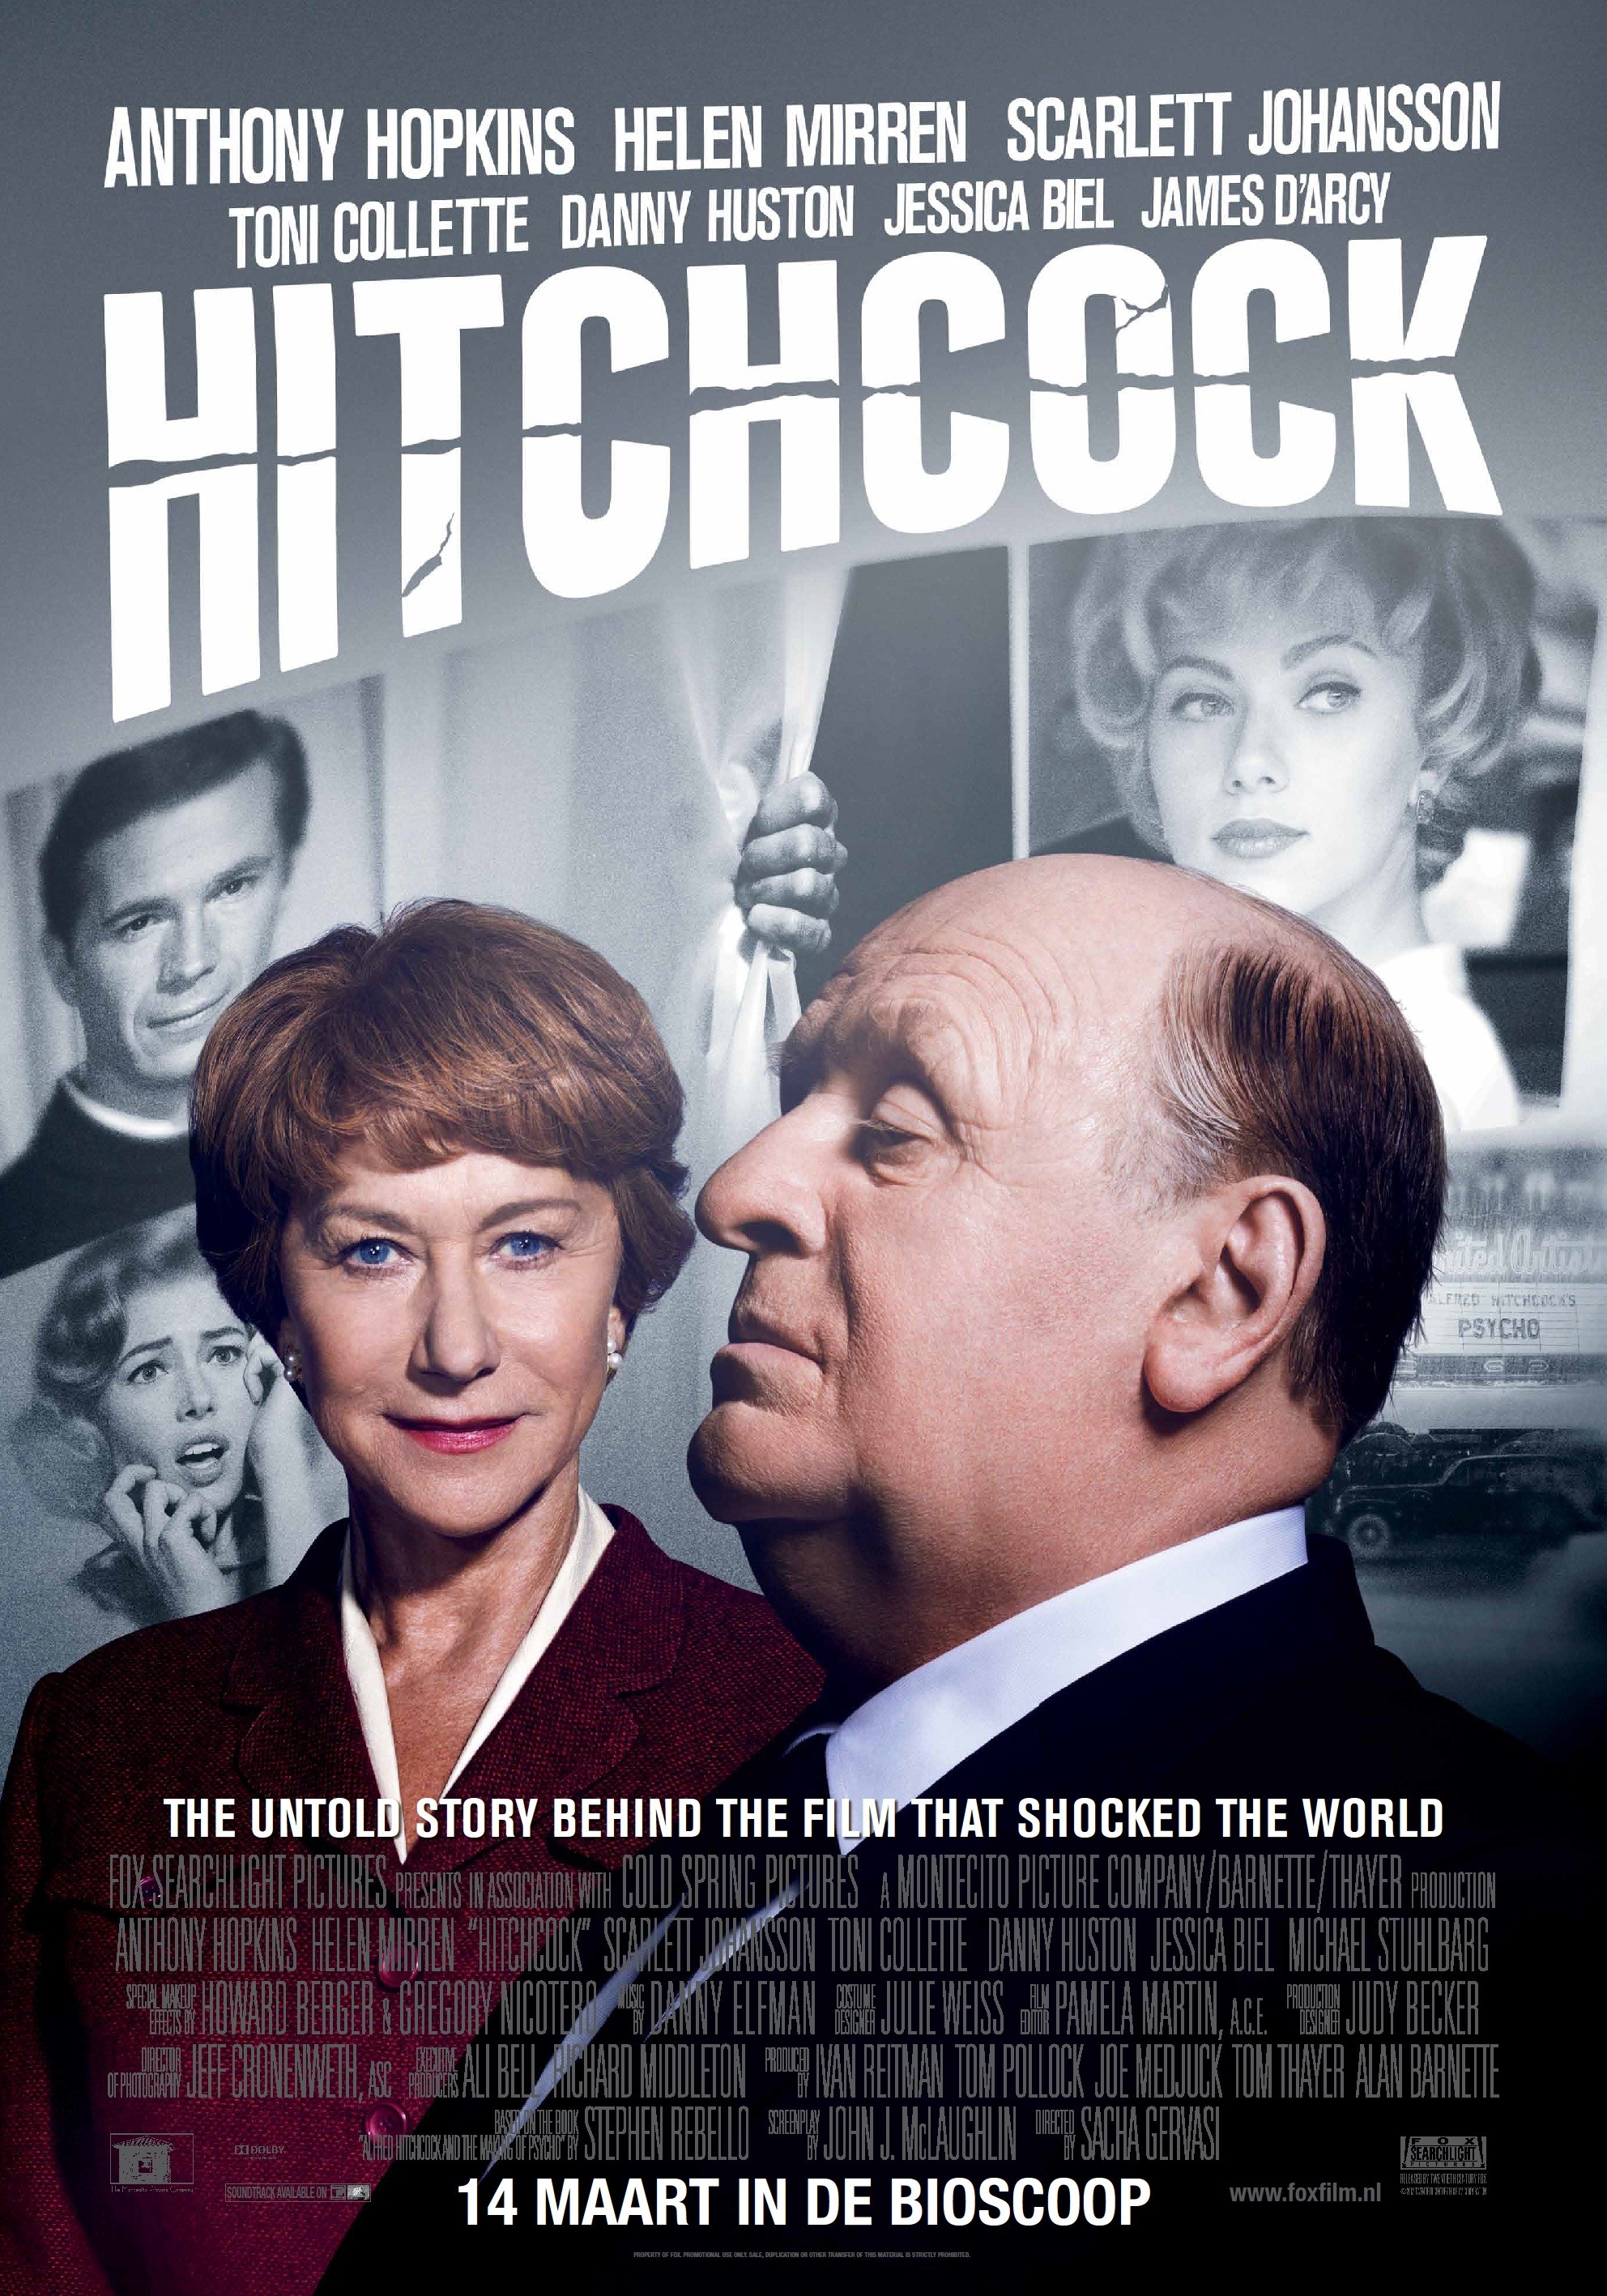 Mega Sized Movie Poster Image for Hitchcock (#6 of 7)